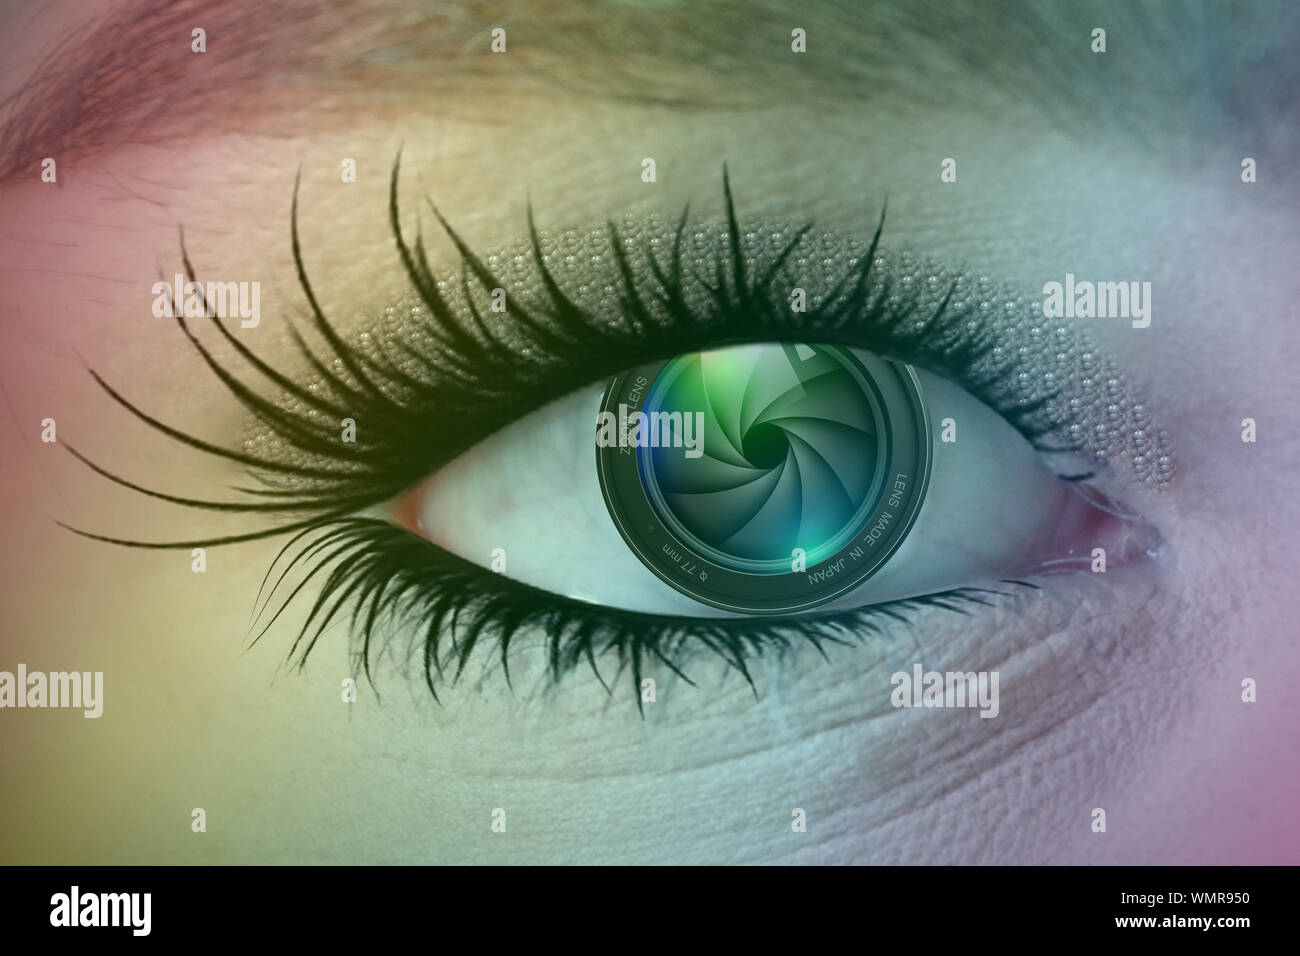 Eye with camera zoom lens as the iris, long eye lashes and a rainbow overlay Stock Photo